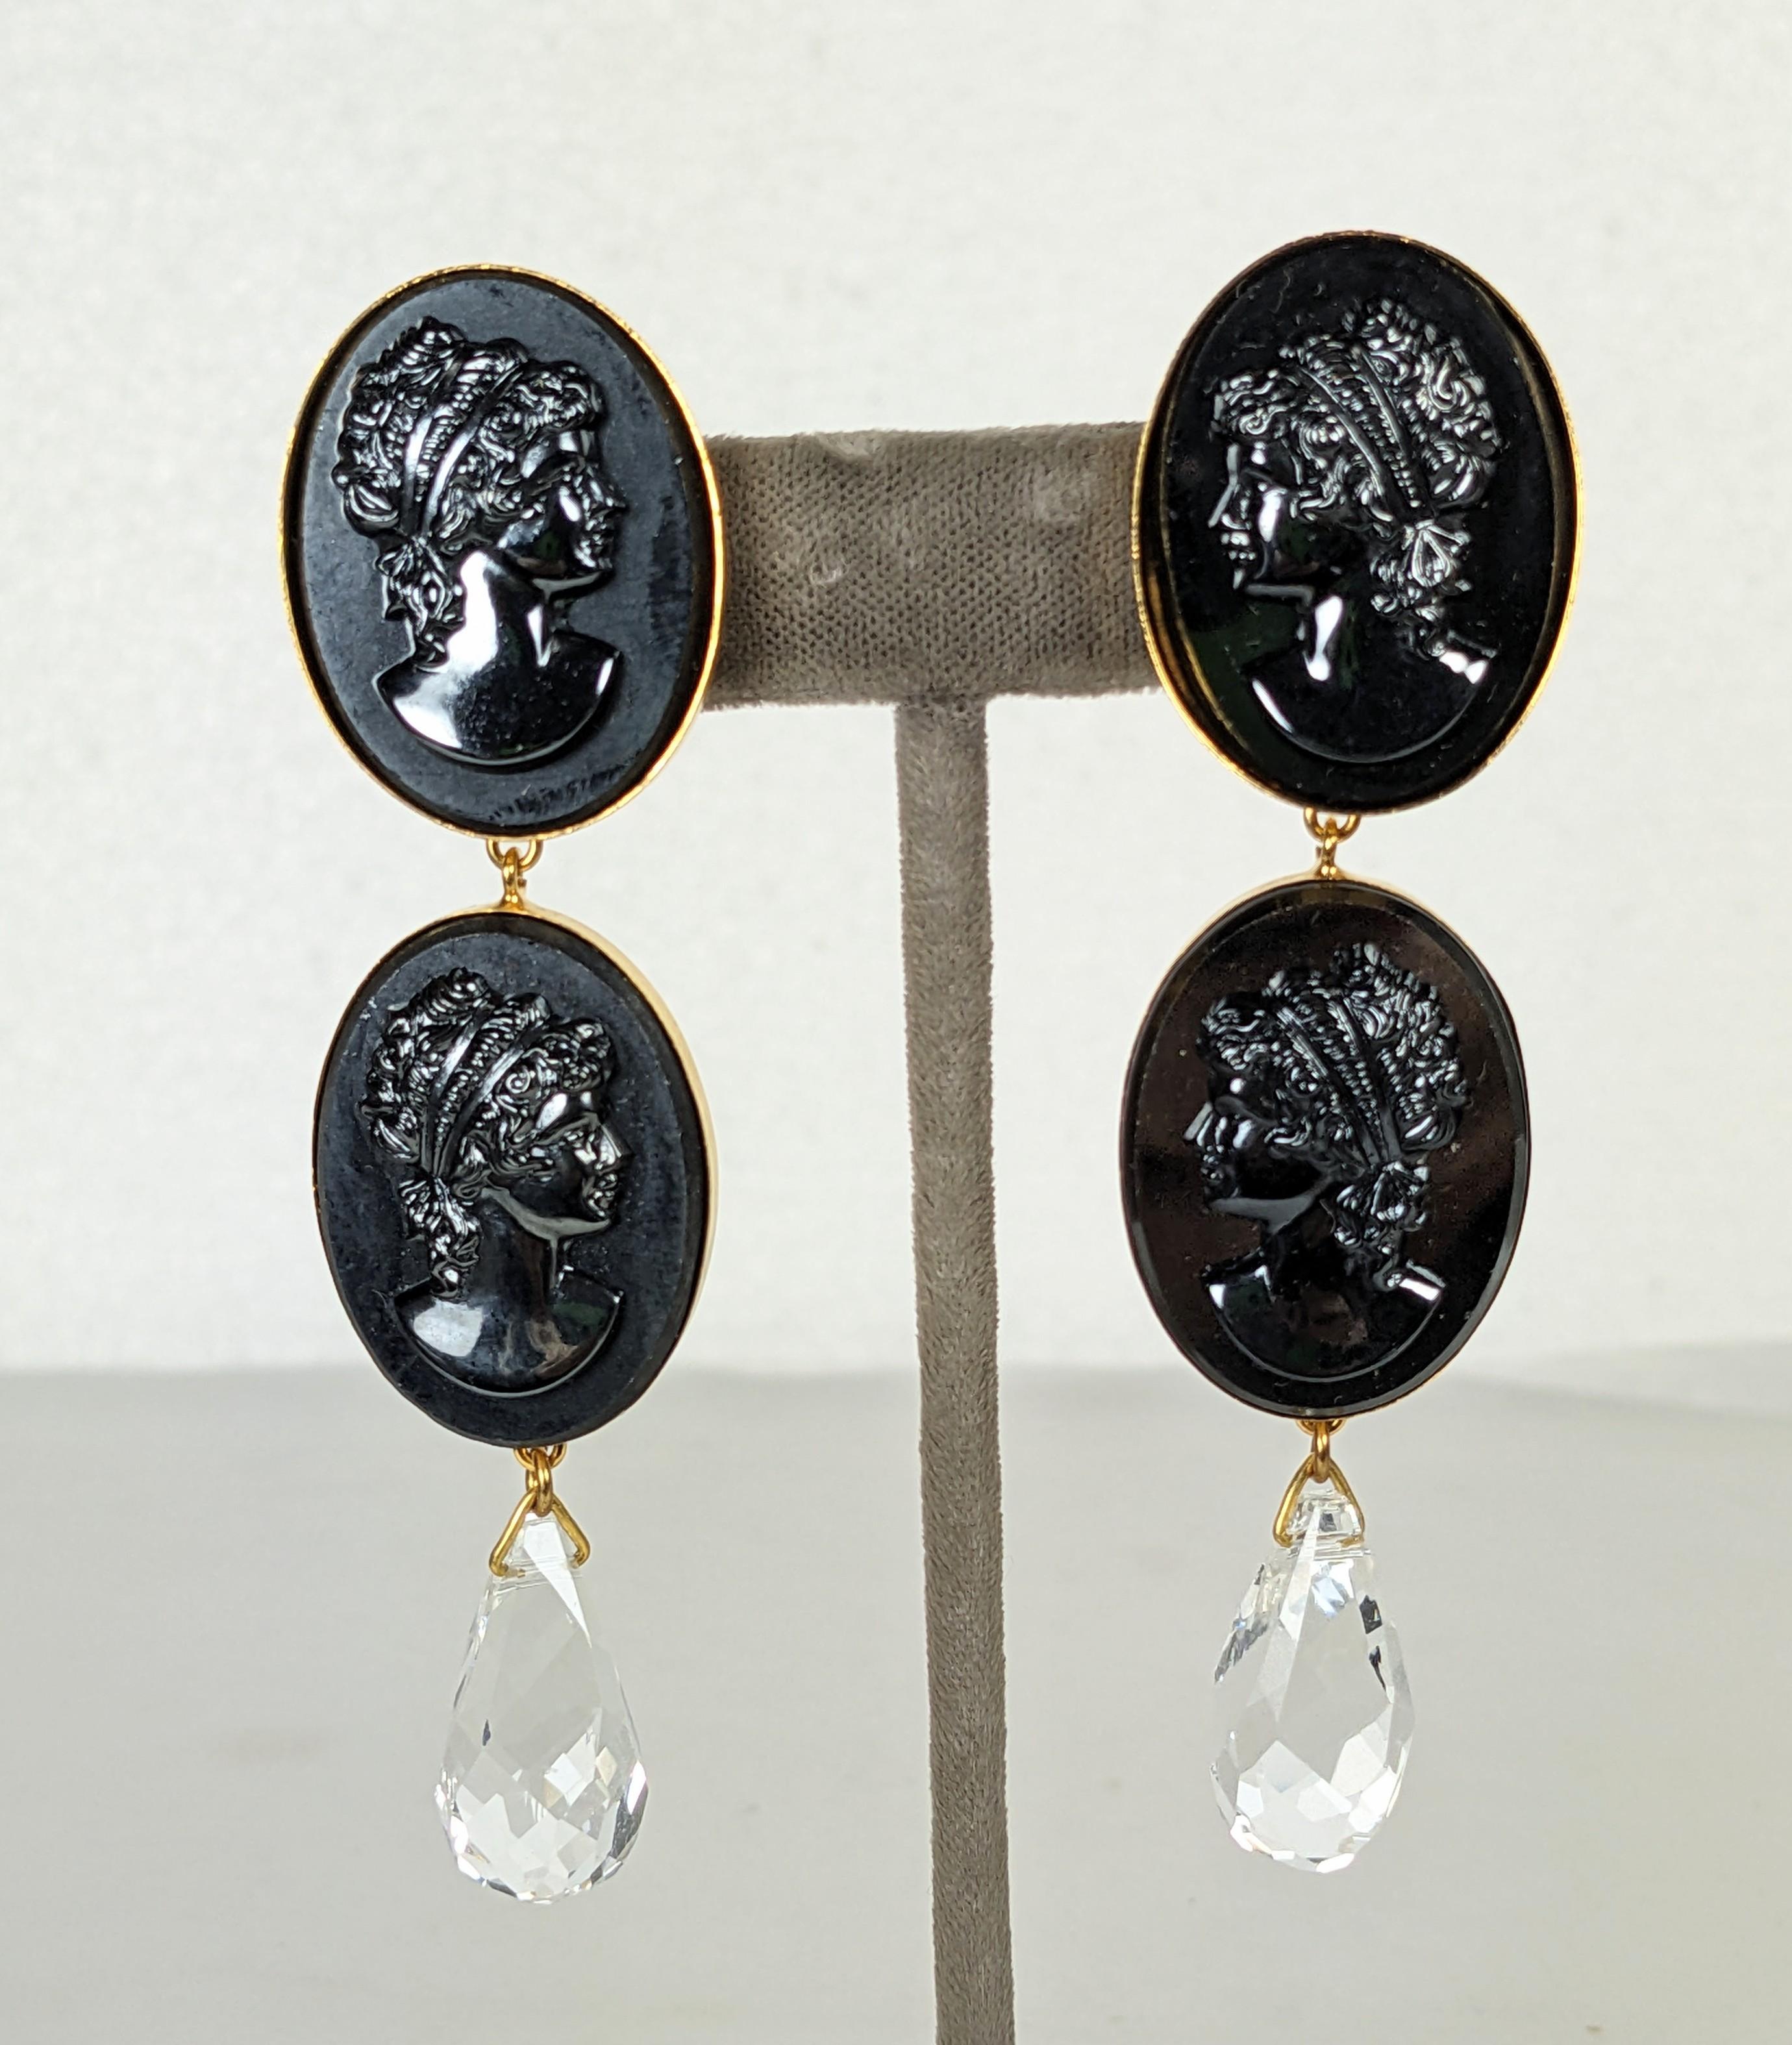 Rare Yves Saint Laurent Cameo Ear clips Haute Couture Spring/Summer 1977. Of black jet glass facing portrait cameos set in gilded metal with faceted crystal pendant drops. 
Excellent Condition, Marked Made in France, Length 3.5